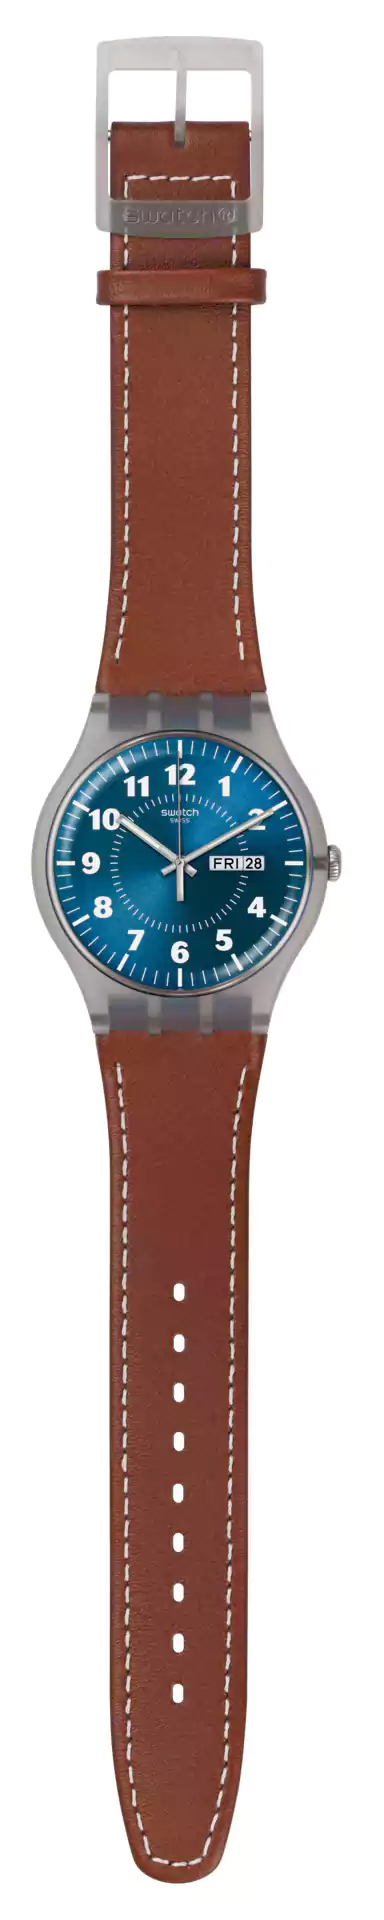 Swatch Men's Watch, Analog, Leather Strap, Brown, SUOK709